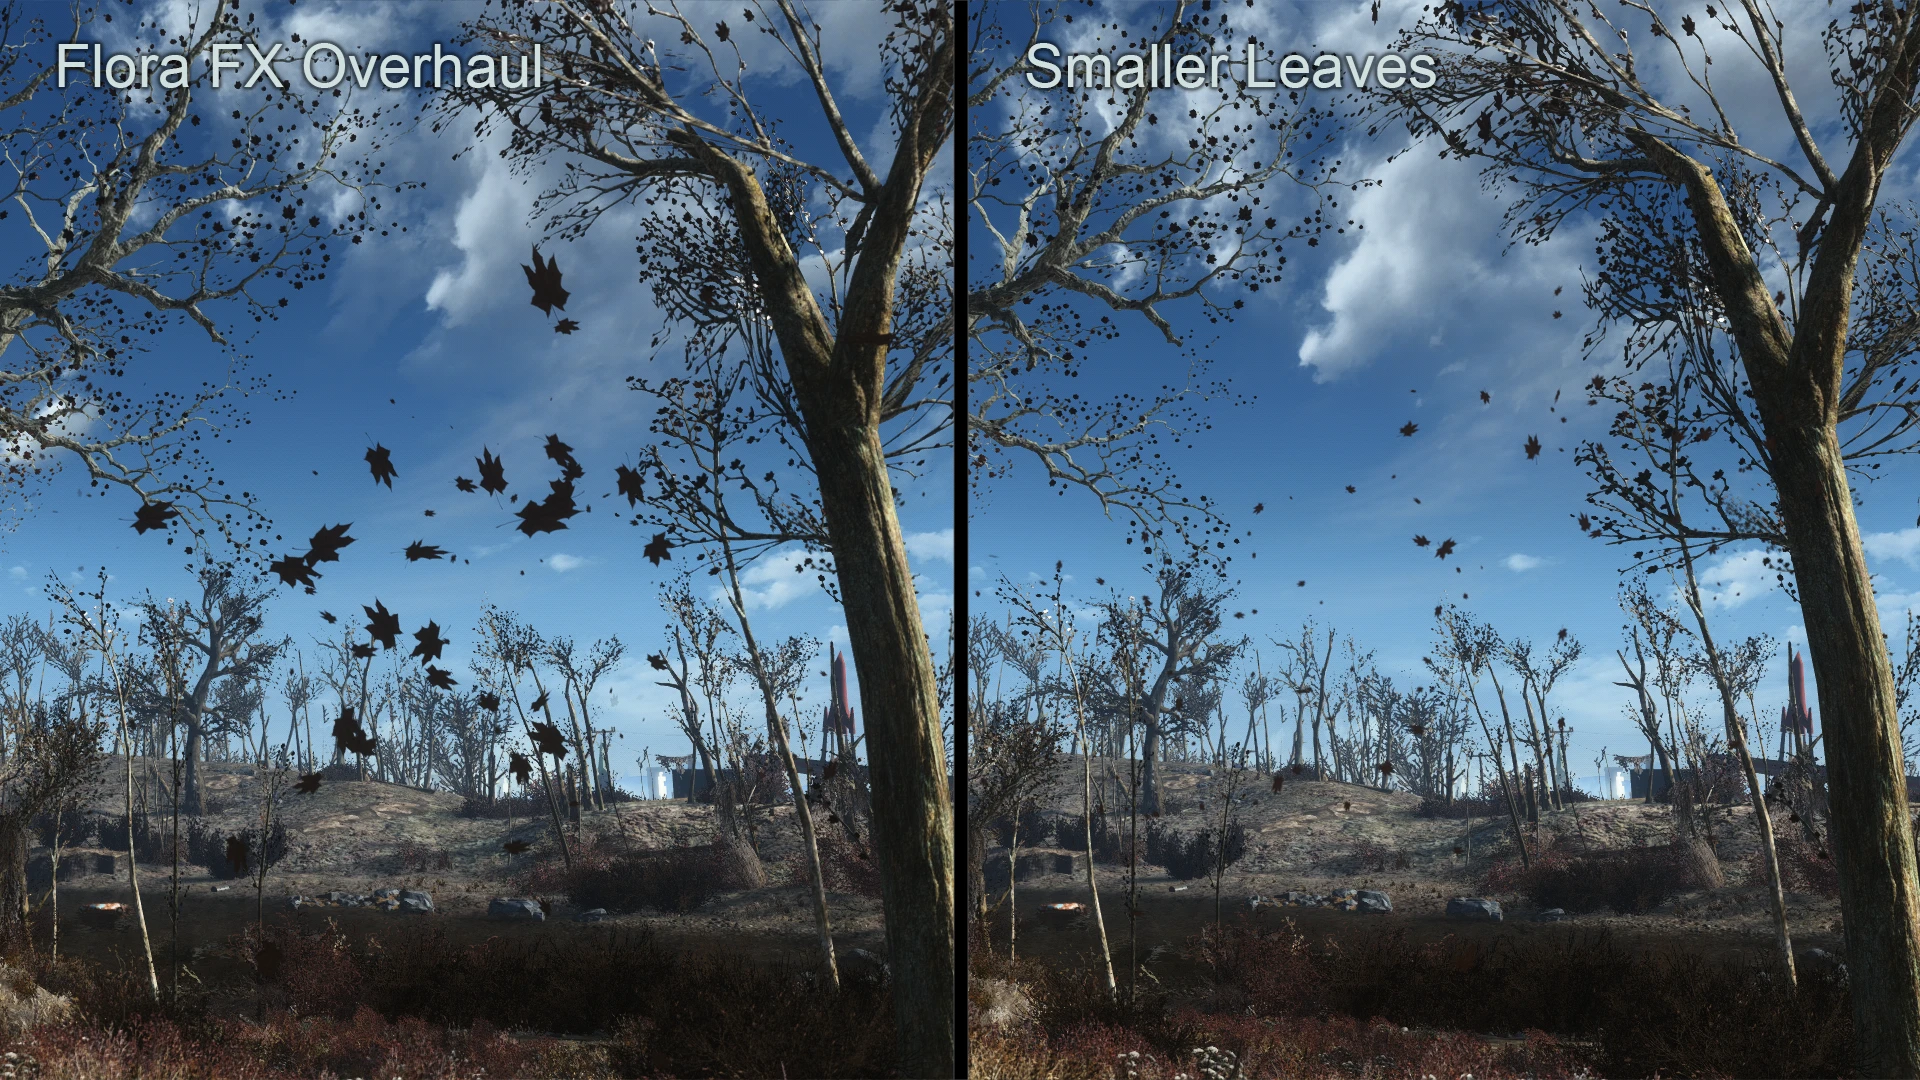 Flora fx overhaul at fallout 4 (119) фото